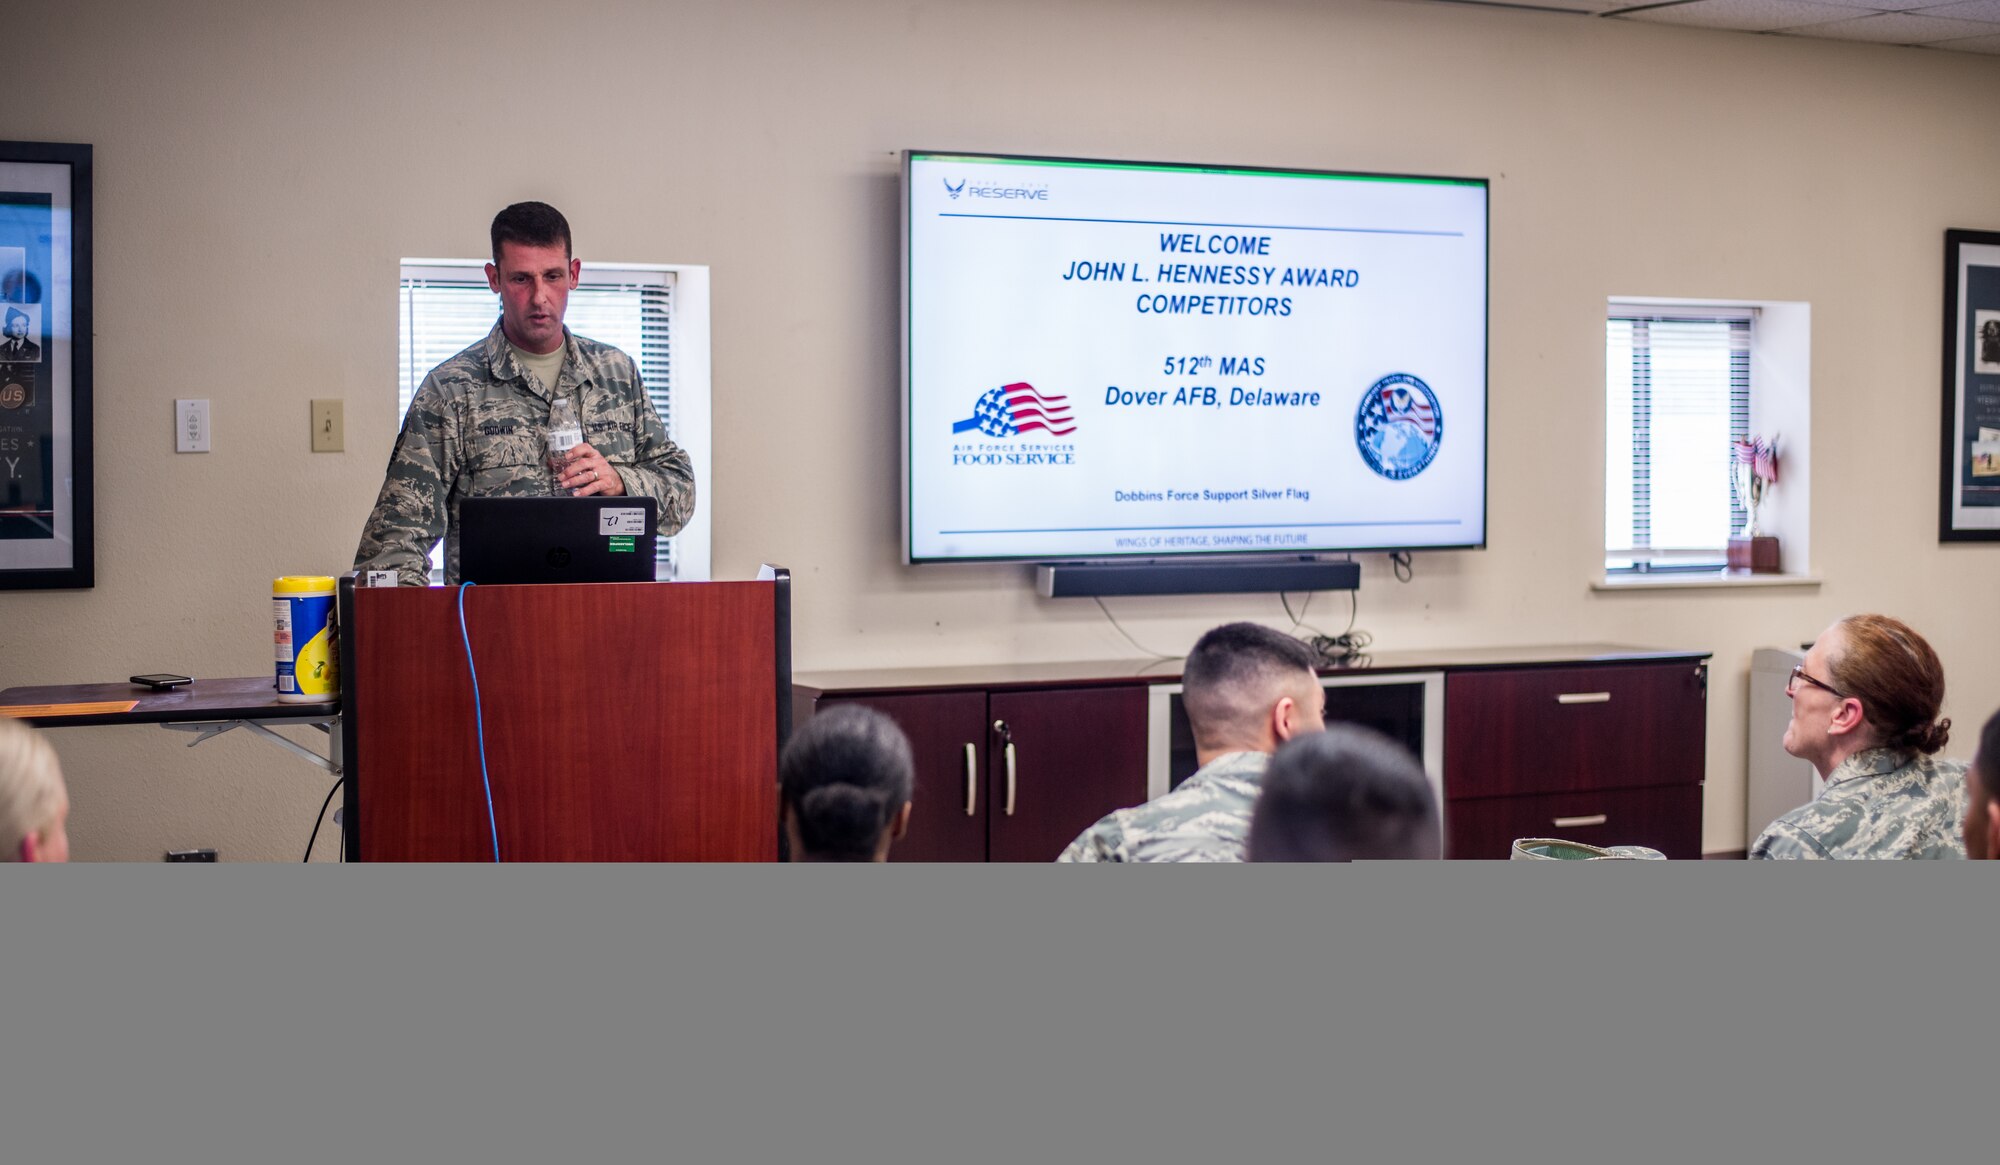 Members of the 512th Memorial Affairs Squadron attend an in-brief during the 2019 John L. Hennessy competition at Dobbins Air Reserve Base, Georgia, March 8, 2019. The 512th MAS was one of four Air Force Reserve Command units chosen to participate in the event. (U.S. Air Force photo by Staff Sgt. Damien Taylor)